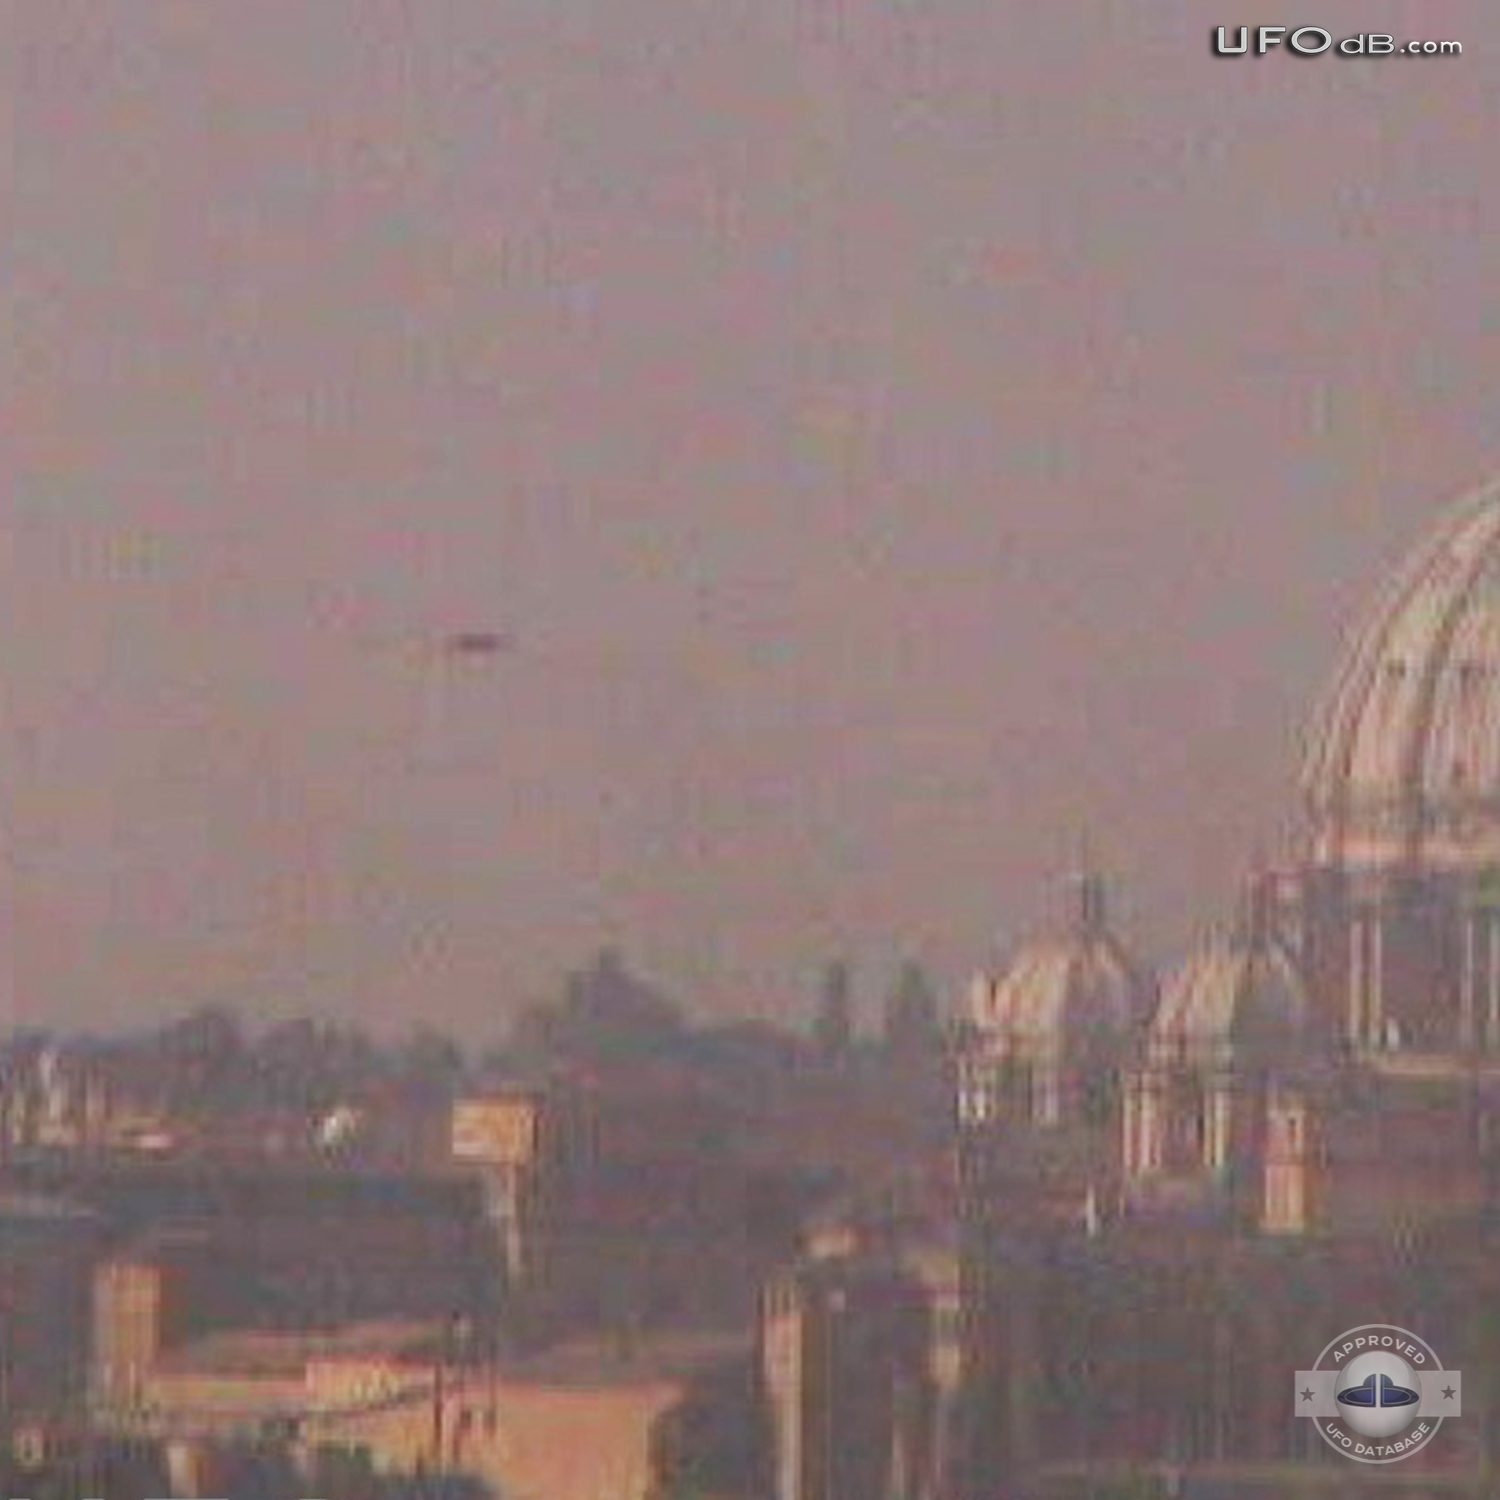 Live cam capture picture of UFO over Vatican city | Italy | May 6 2011 UFO Picture #285-2